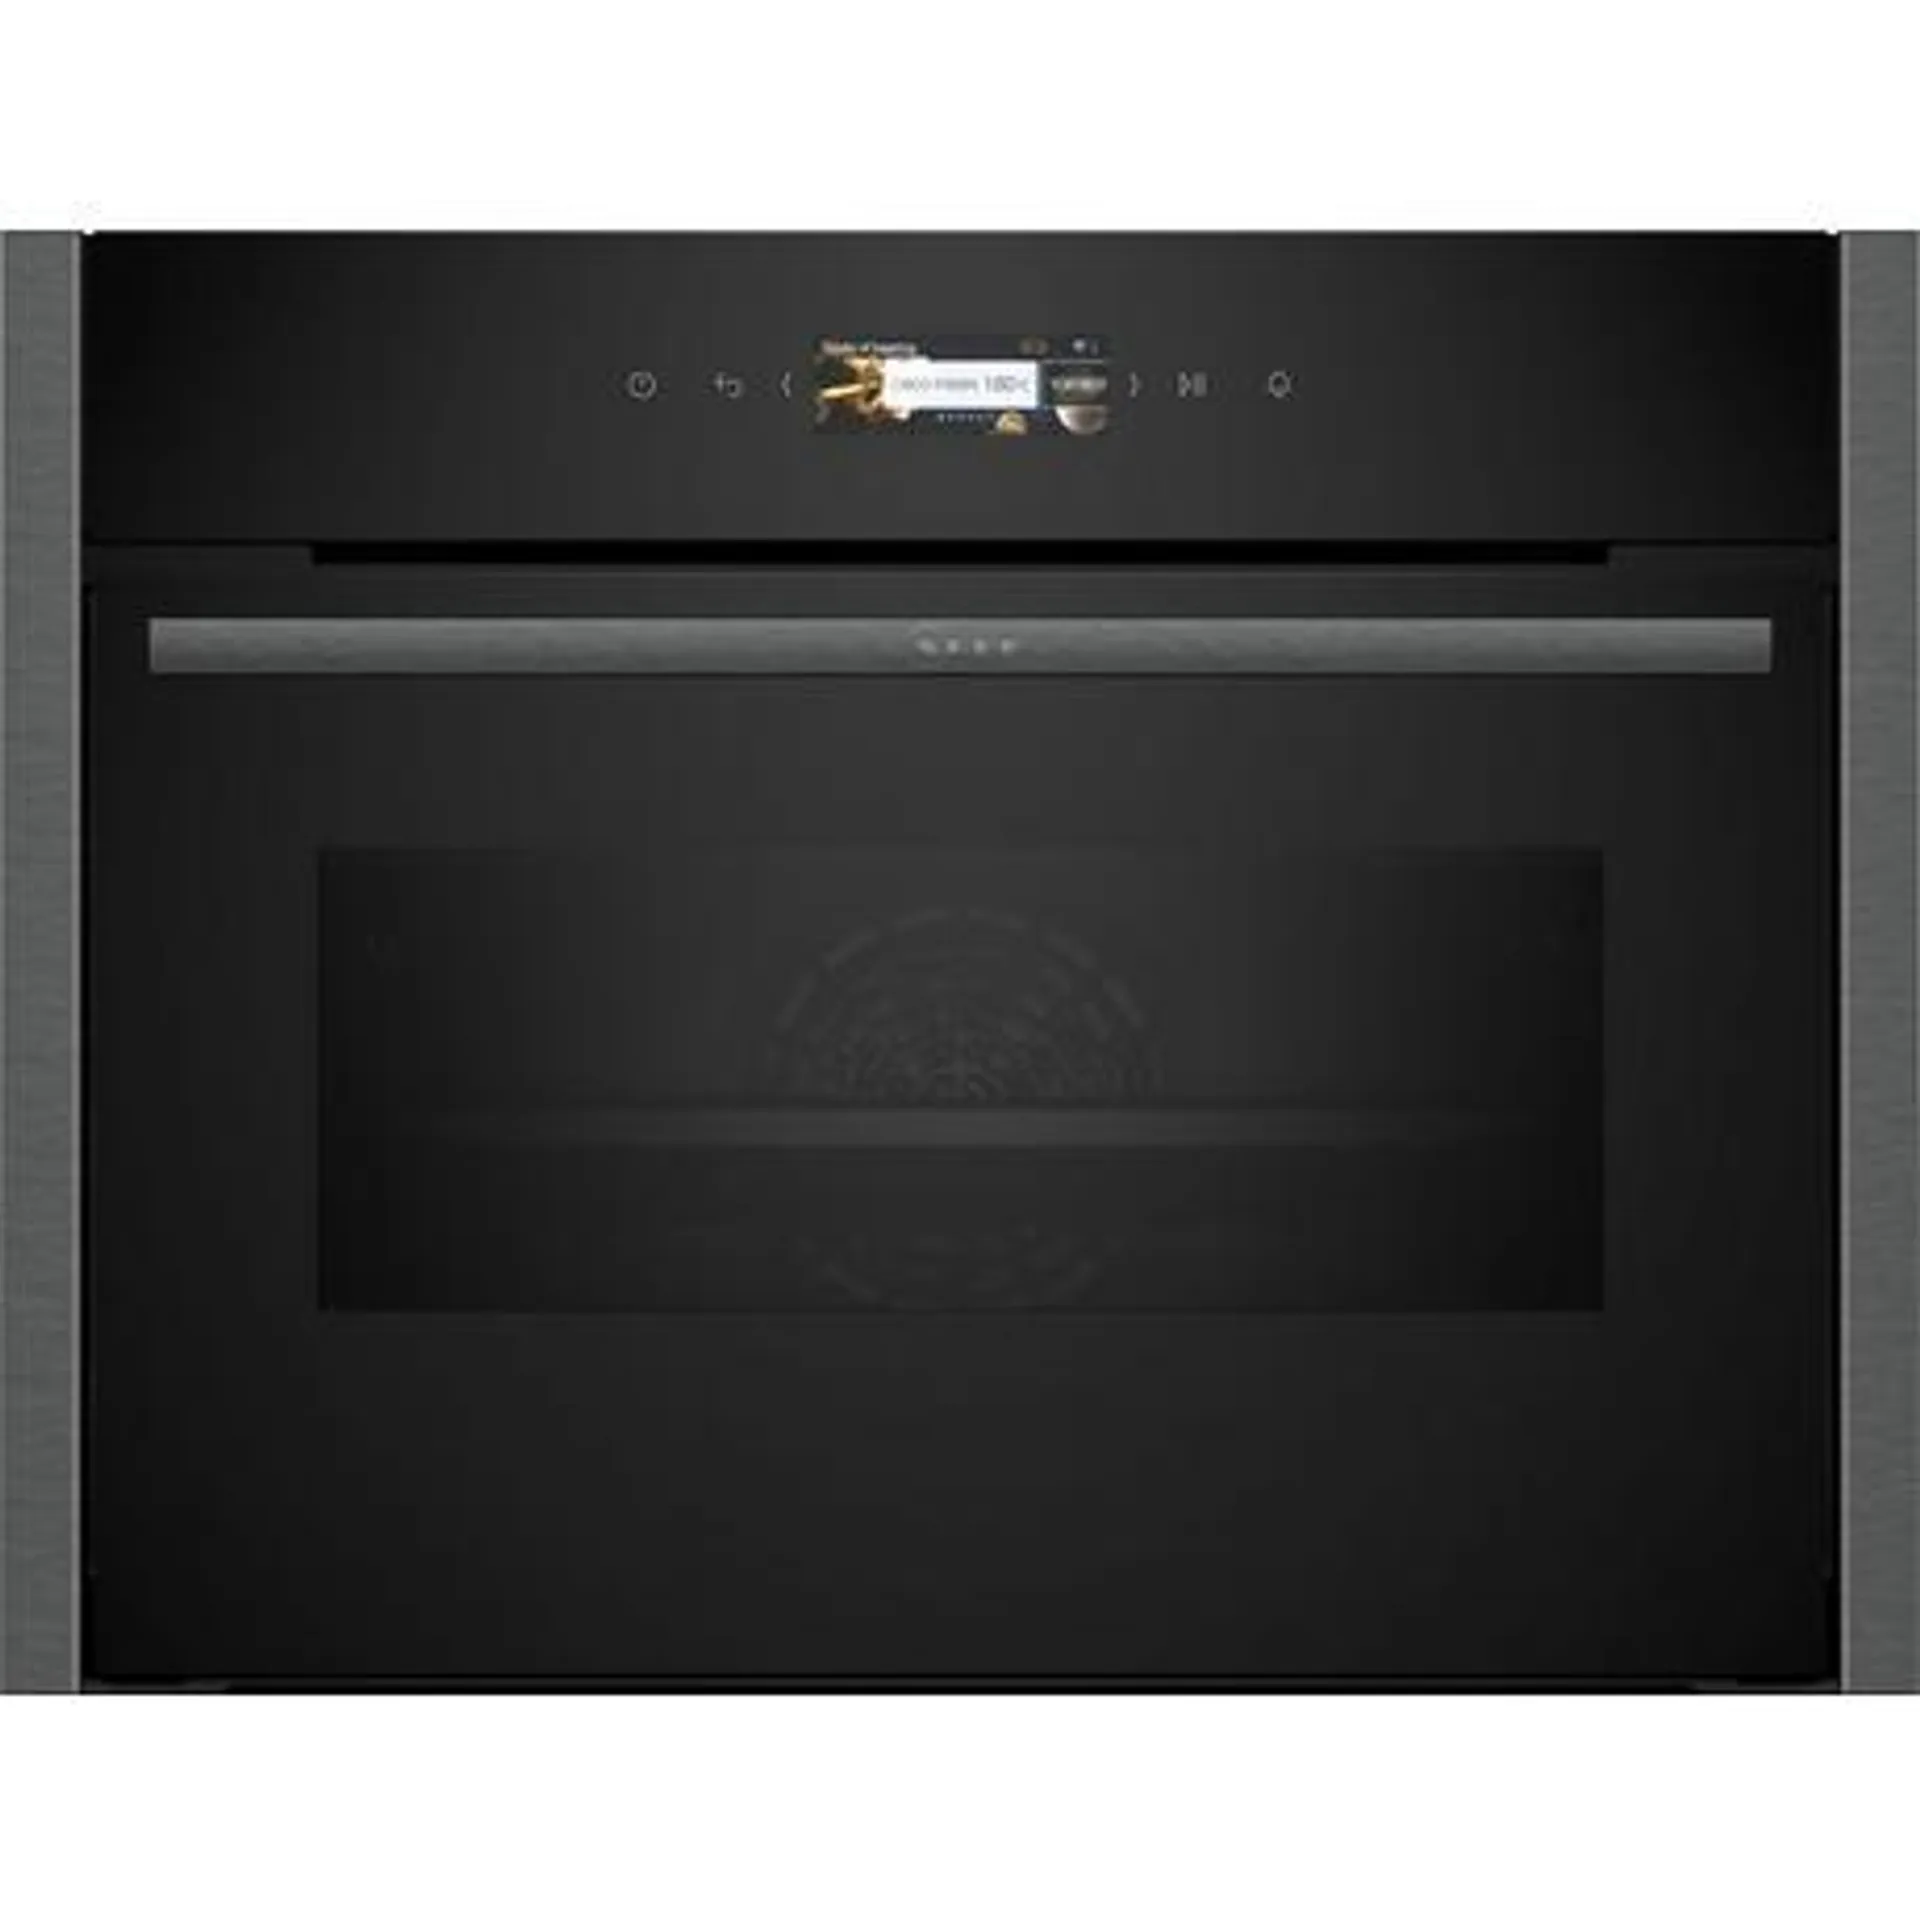 NEFF C24MR21G0B Built In Compact Oven with microwave function